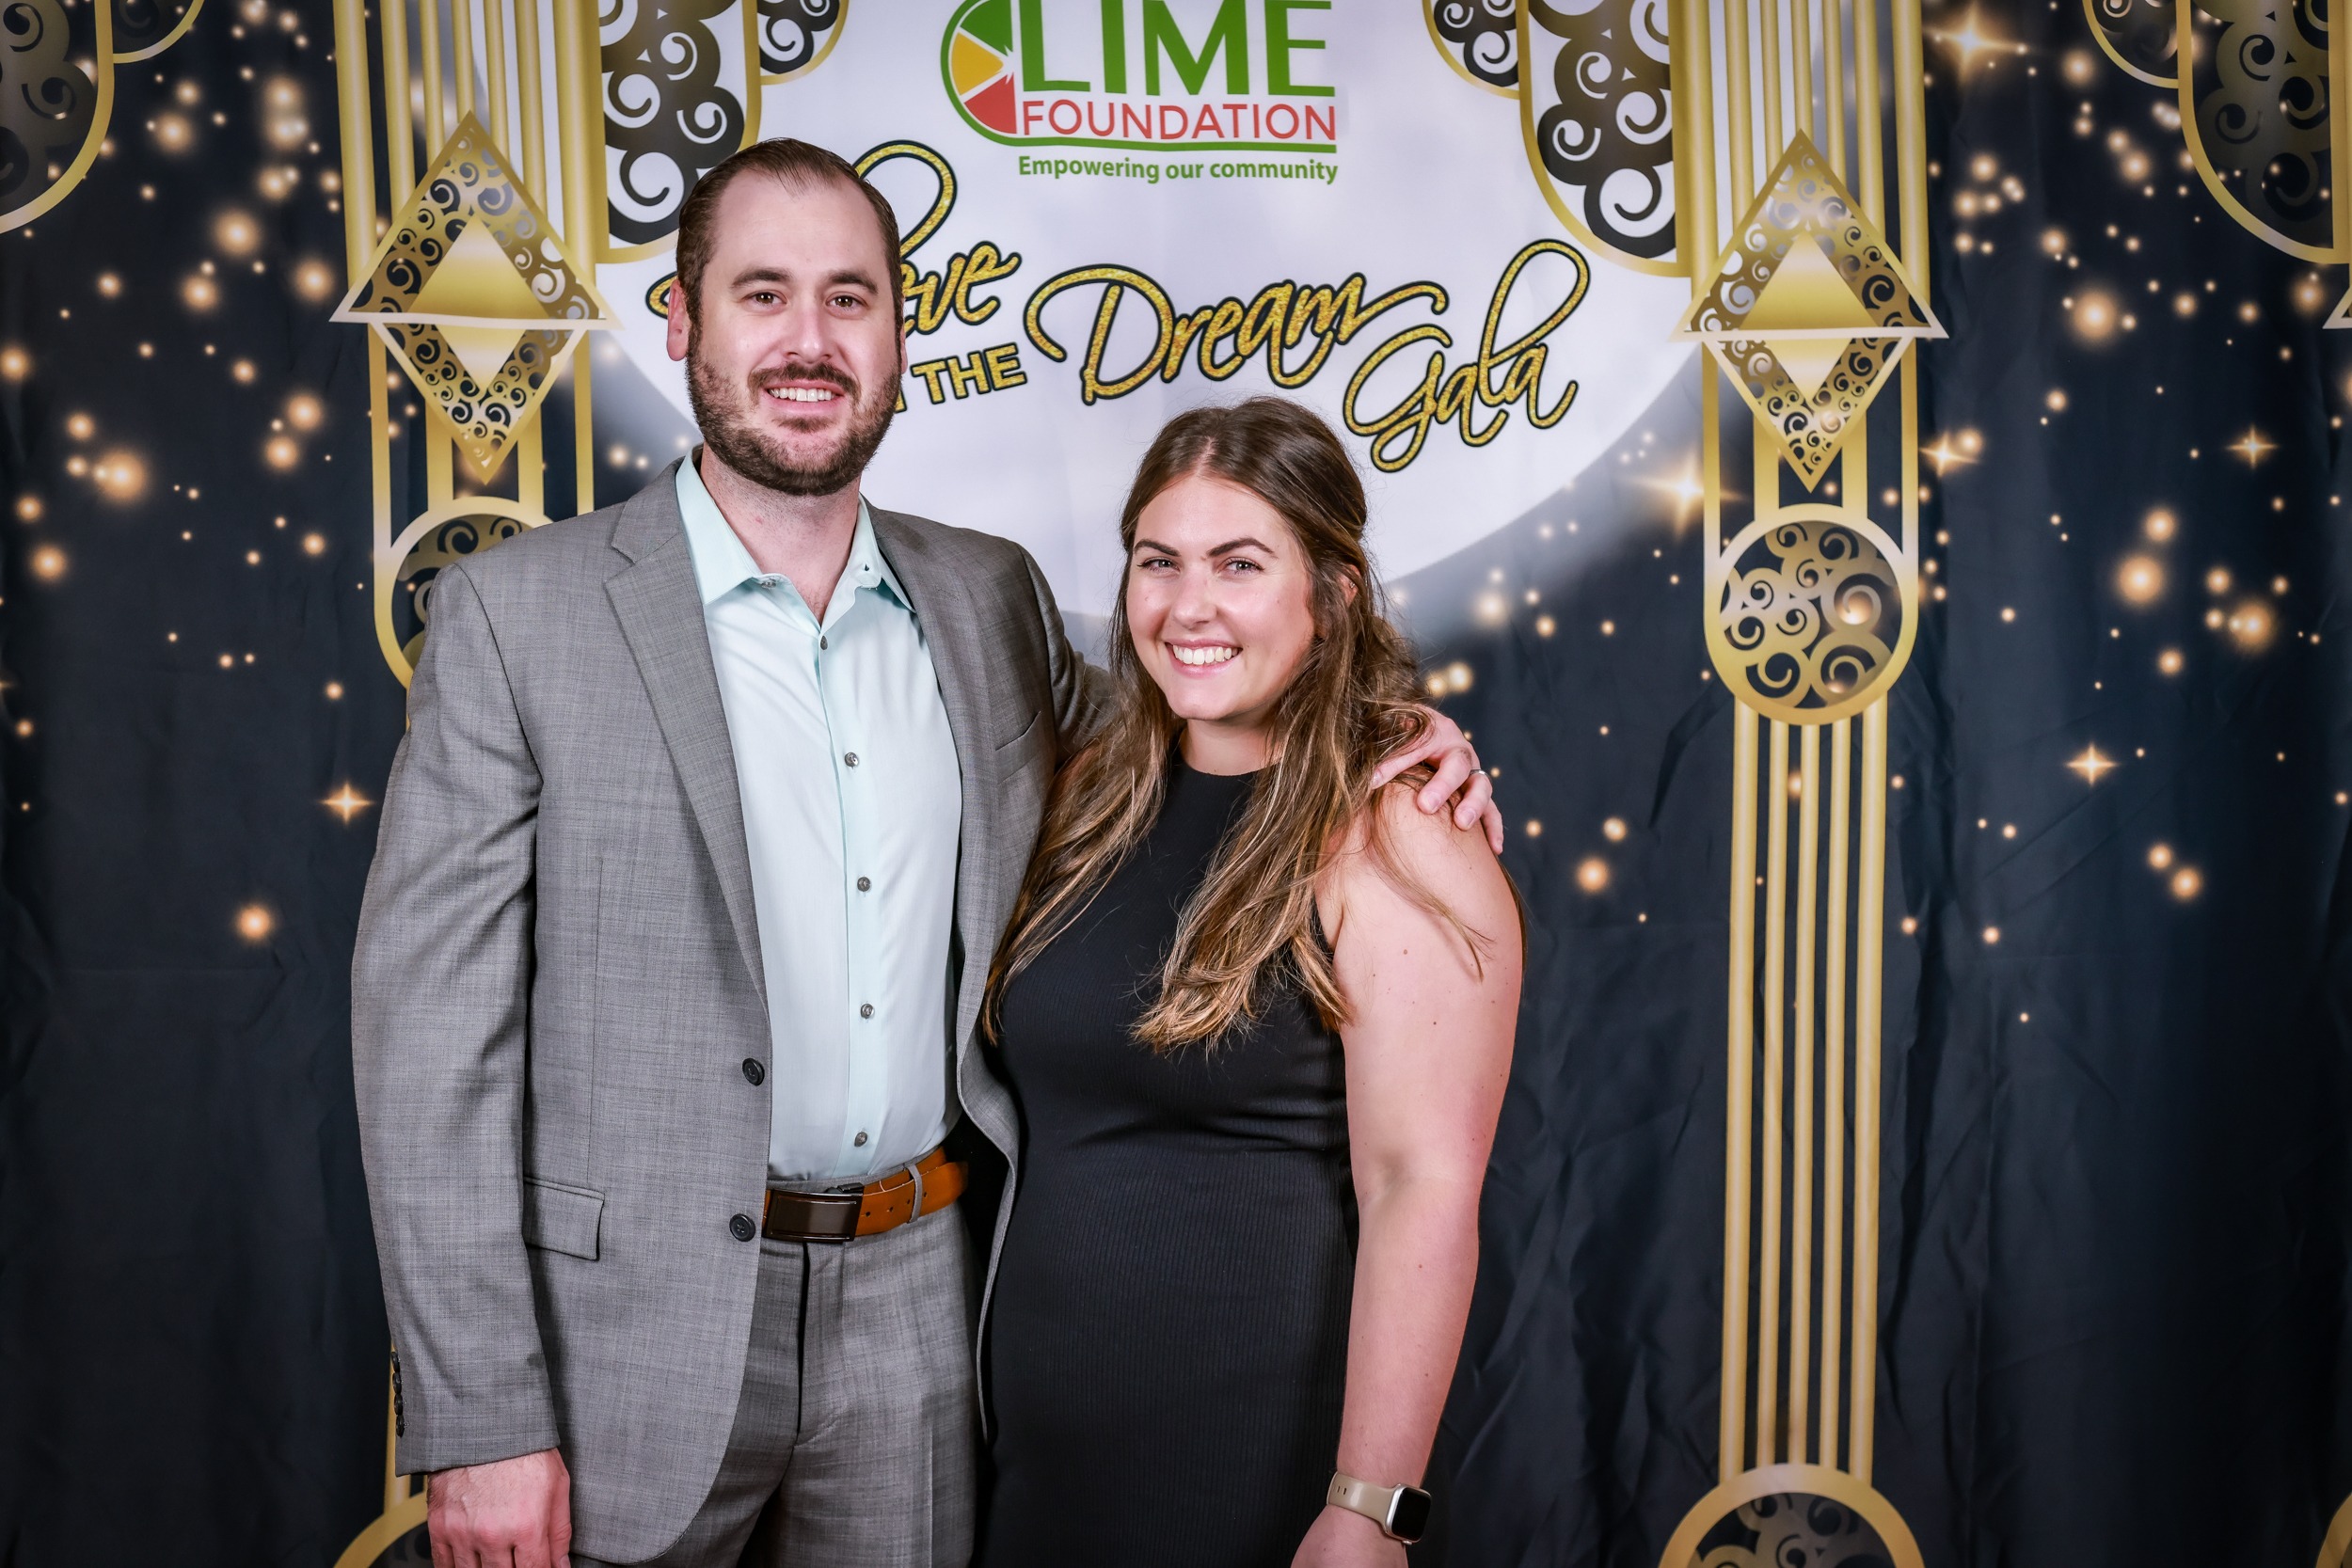 A man and woman posing for a photo in front of a backdrop at The LIME Foundation of Santa Rosa.